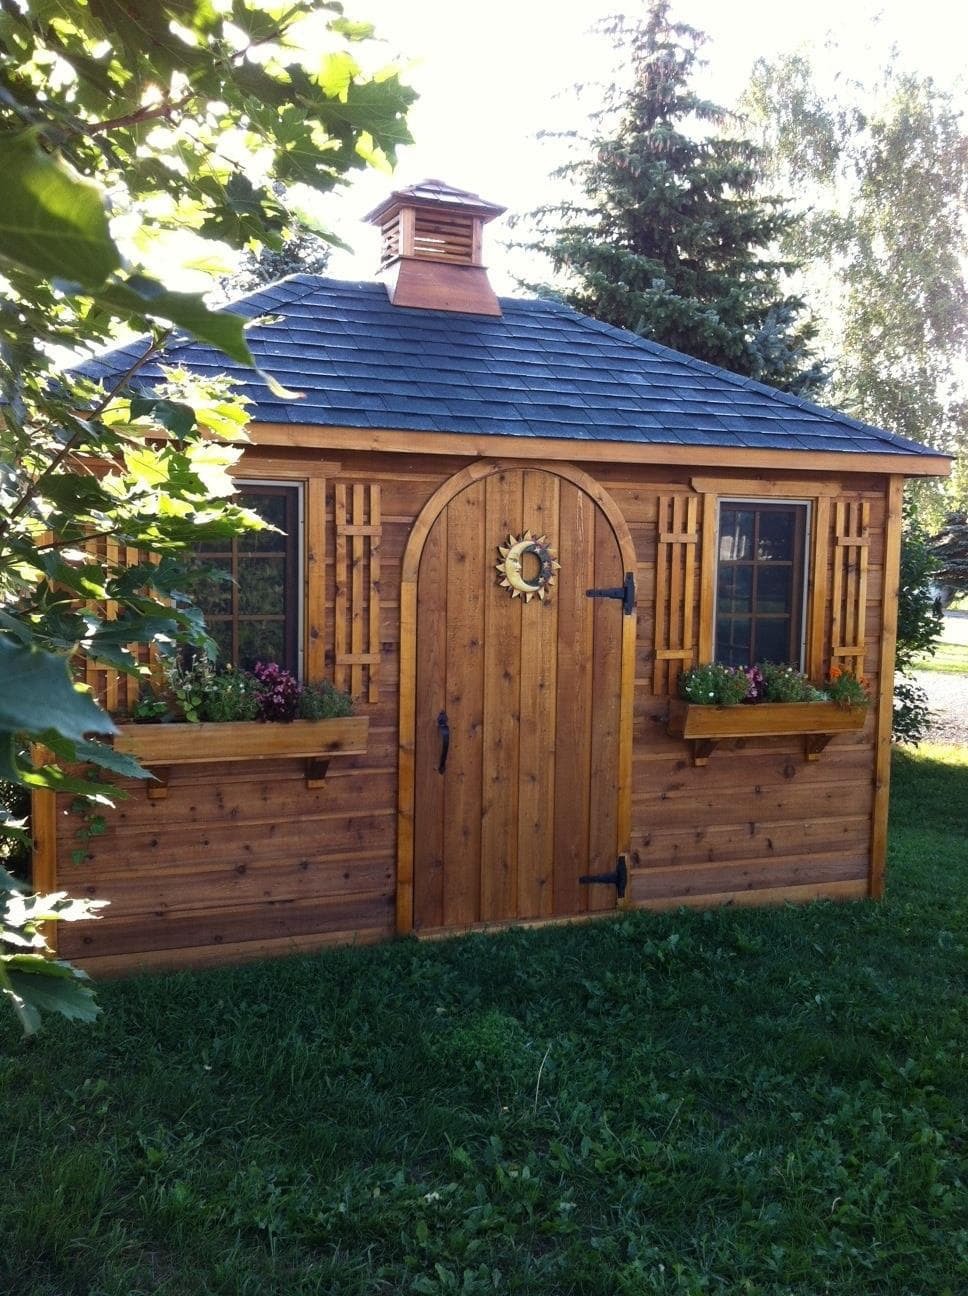 Cedar Sonoma 8 X12 cabin with antique flower boxes in Brooklin Ontario. ID number 223823-6